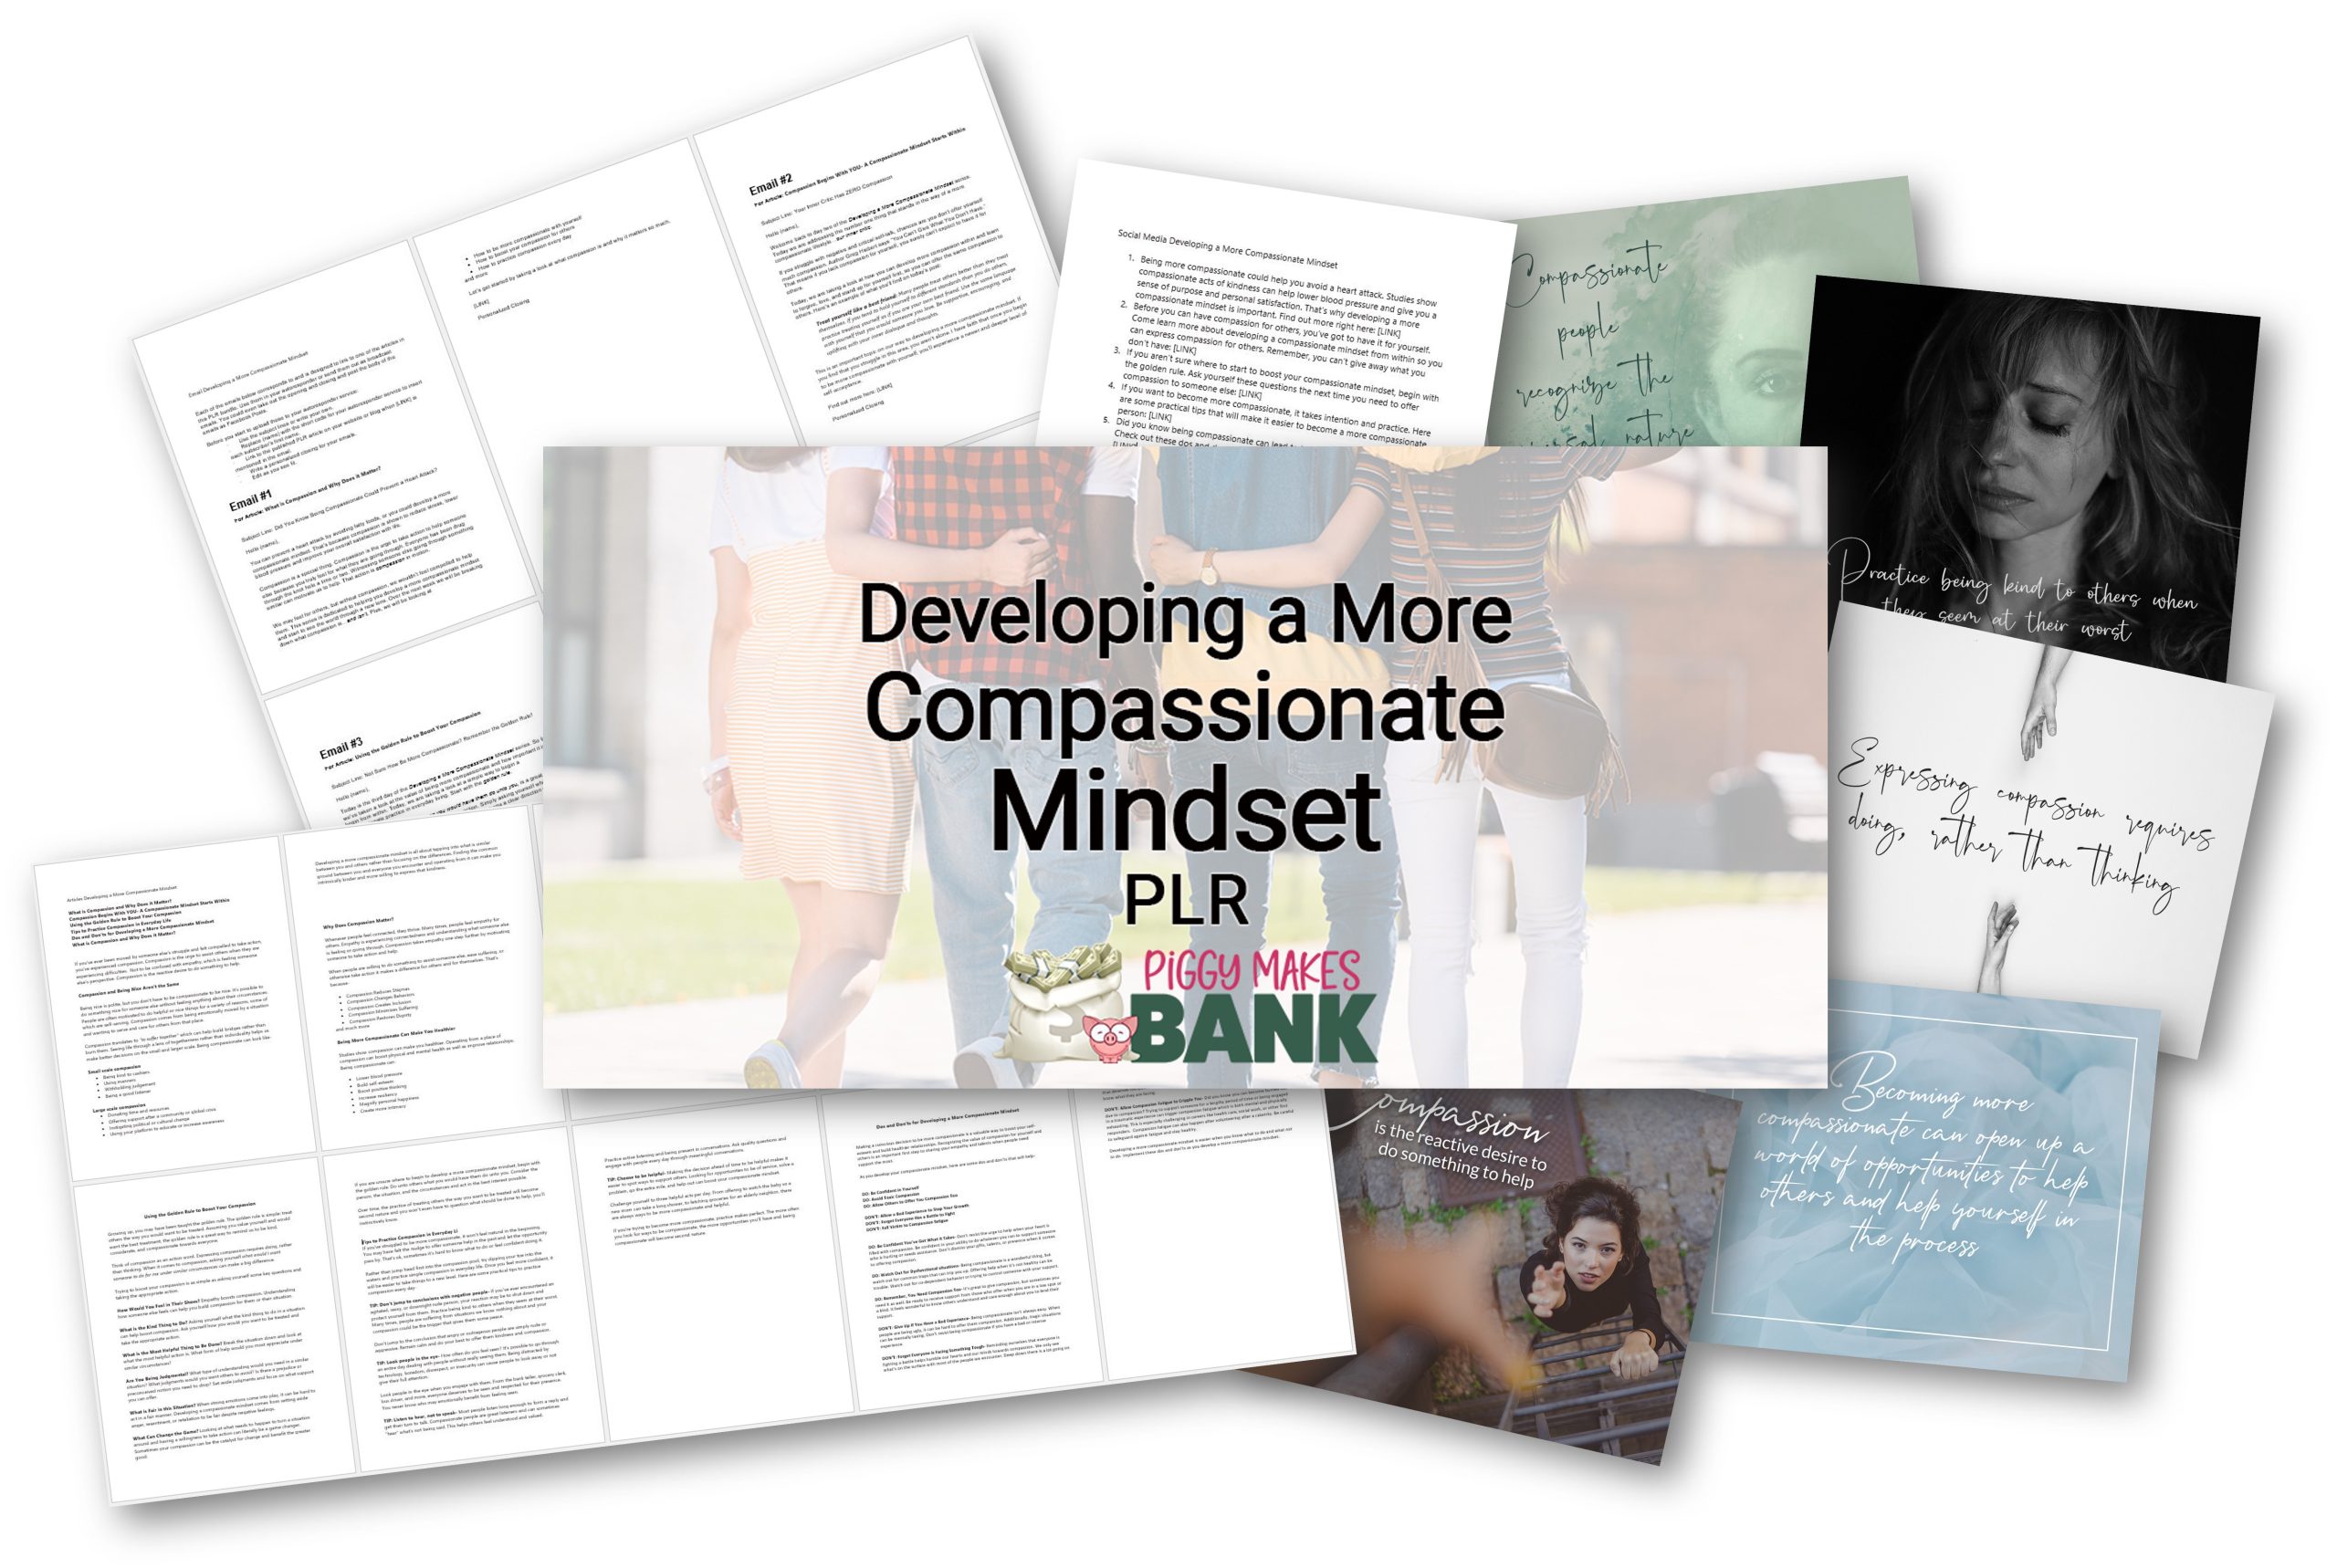 Developing a More Compassionate Mindset PLR